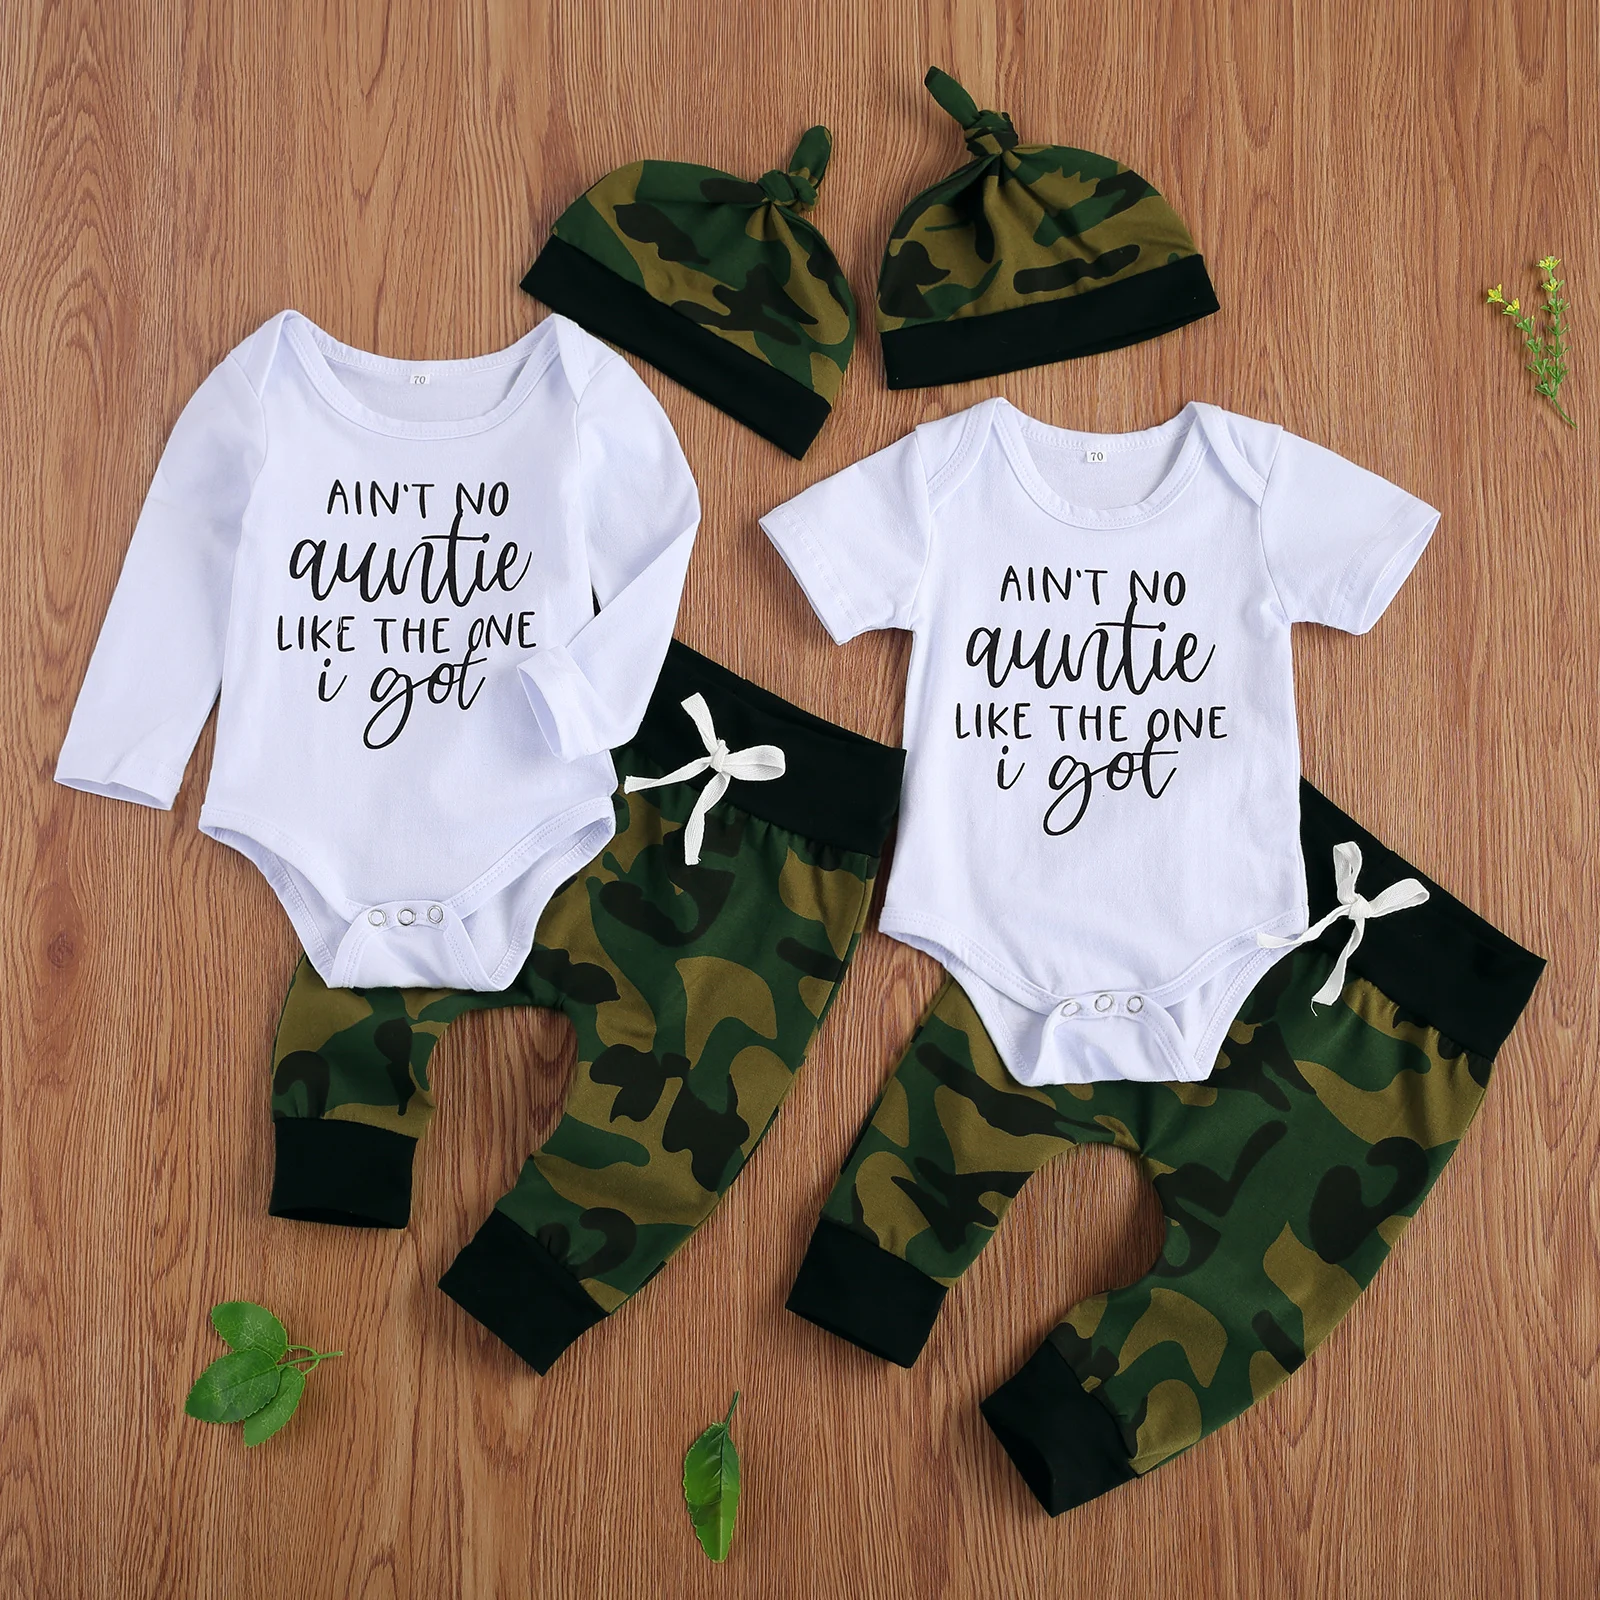 

Toddler Baby Boys Fall Summer Cotton Outfit Cute Short Long Sleeve Letter Print Bodysuit Camo Pants Top Knot Hat 3Pcs Casual Set